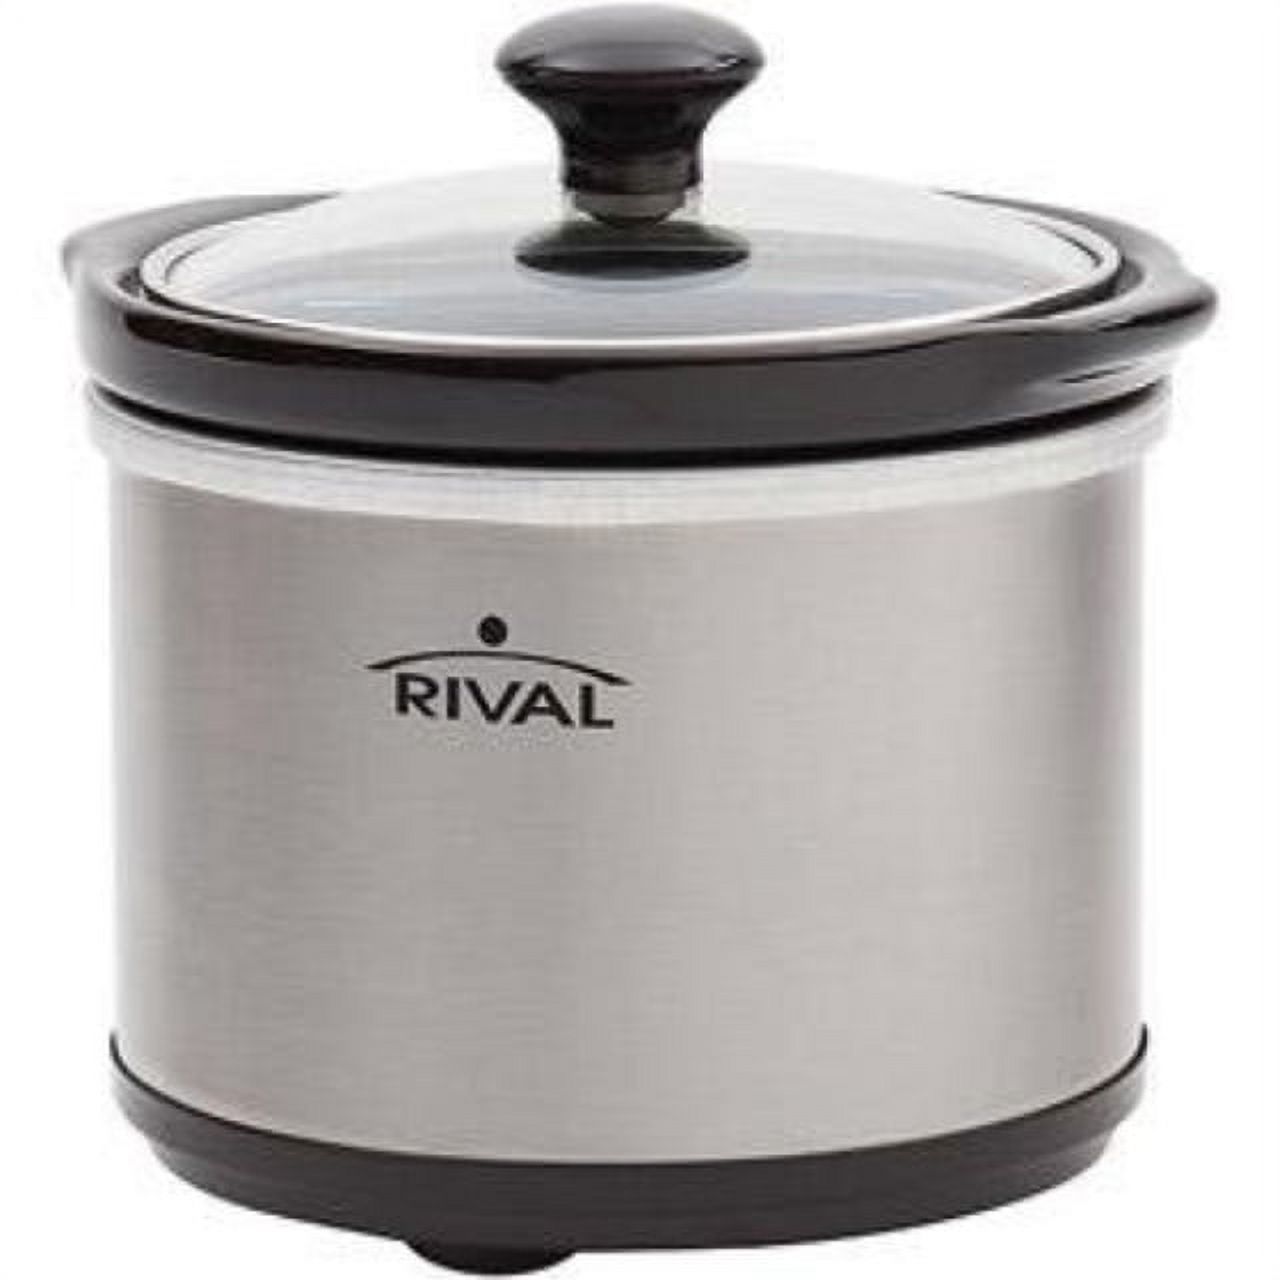 Rival .65-Quart Mini Slow Cooker, Stainless Steel - image 1 of 3